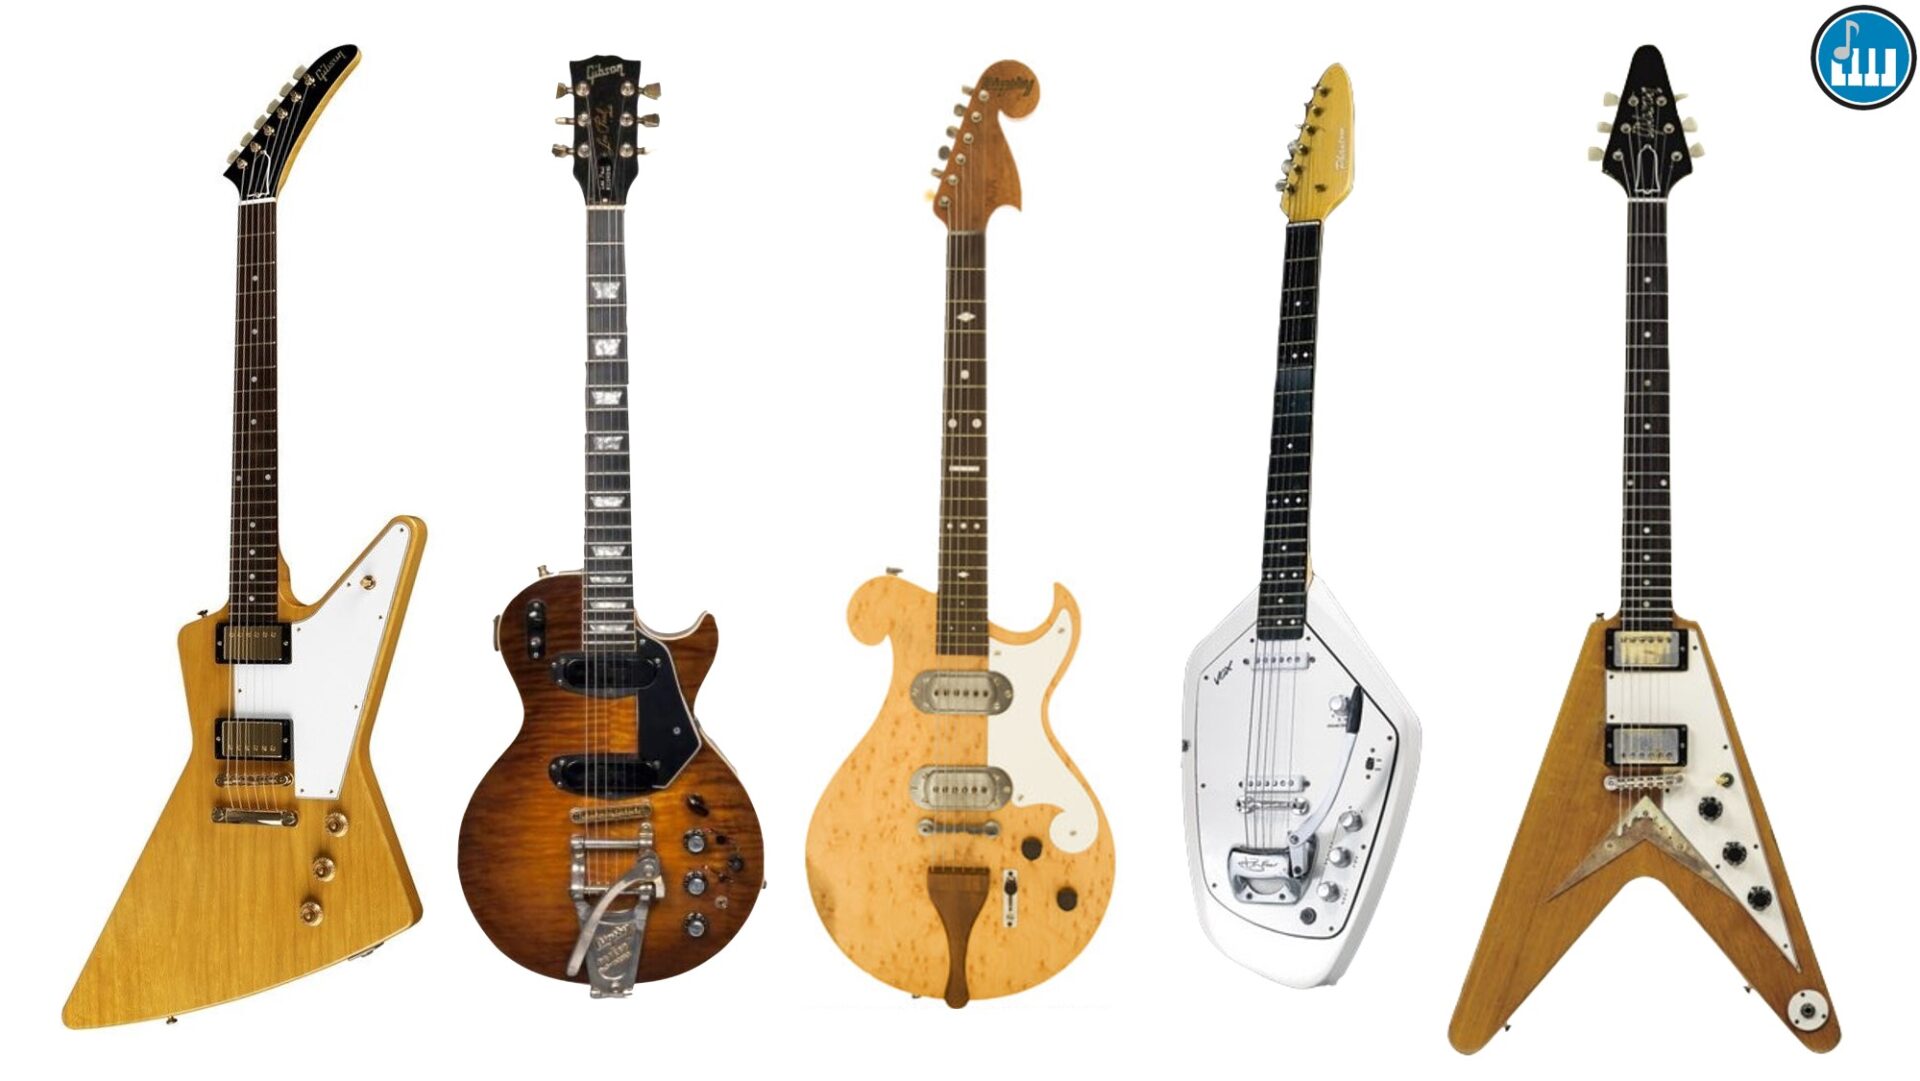 The rarest, most collectible and most desired electric guitars in the world